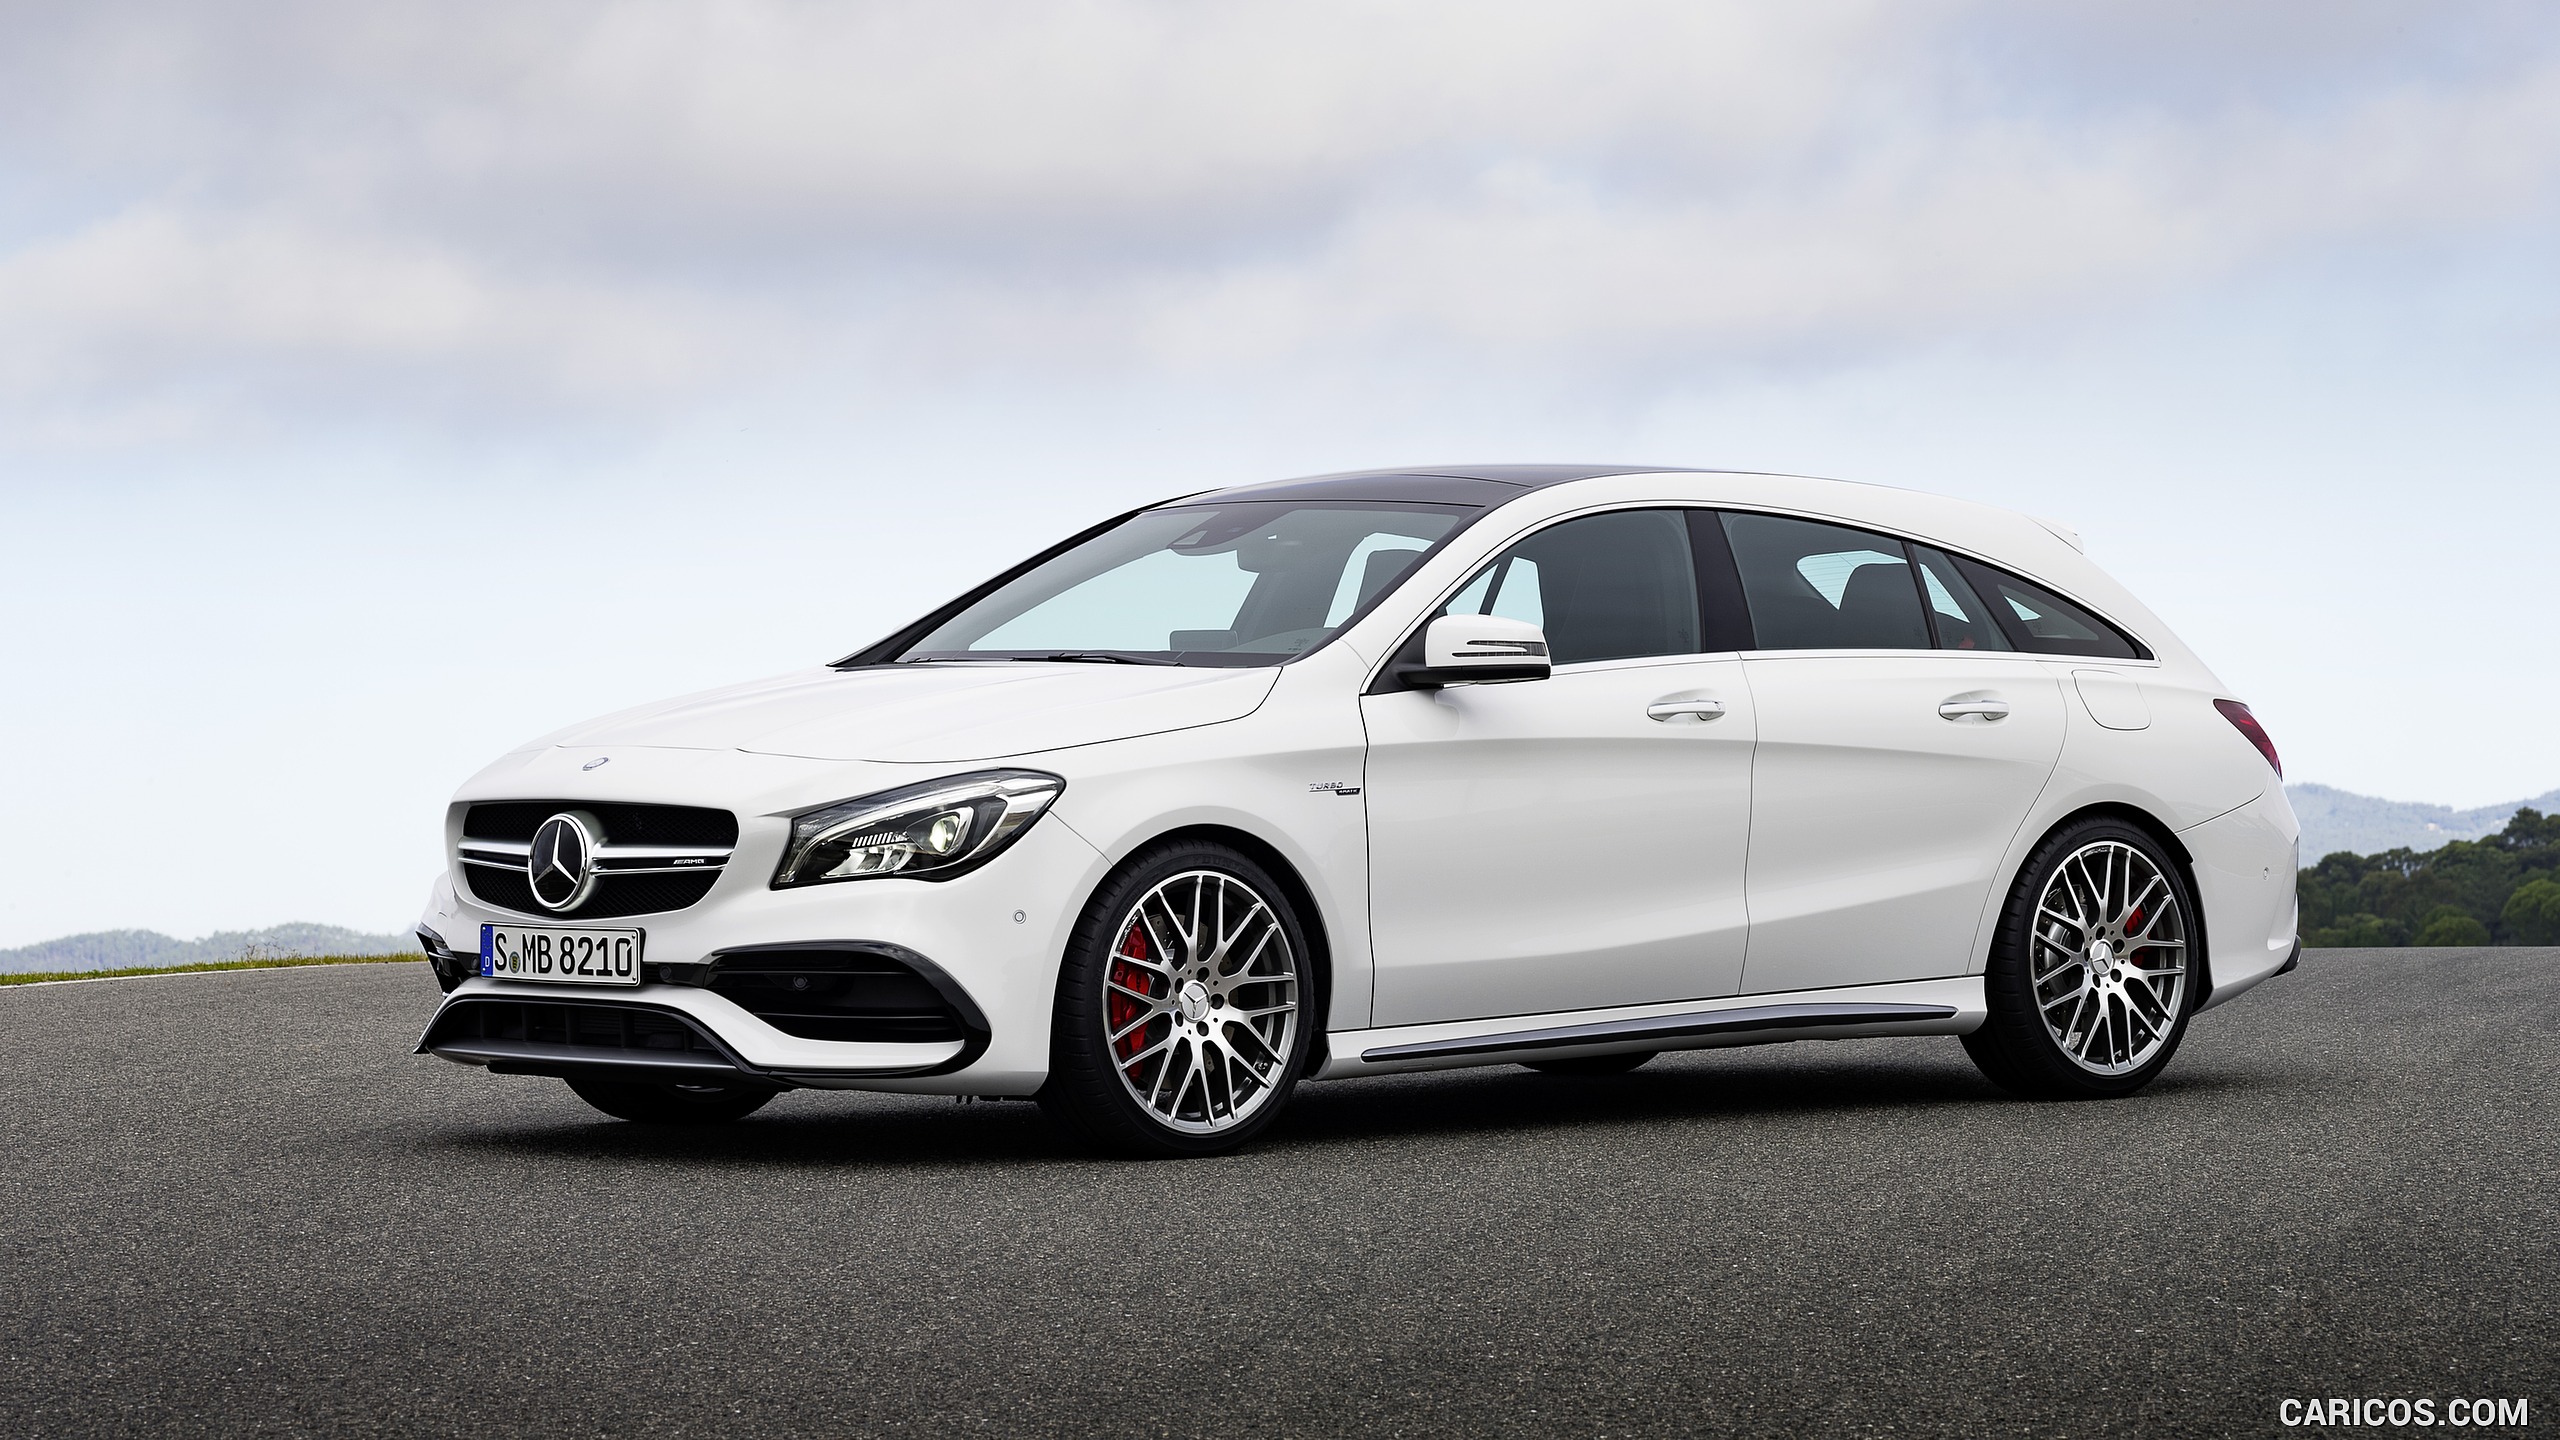 2017 Mercedes-AMG CLA 45 Shooting Brake (Chassis: X117, Color: Diamond White) - Front, #6 of 48